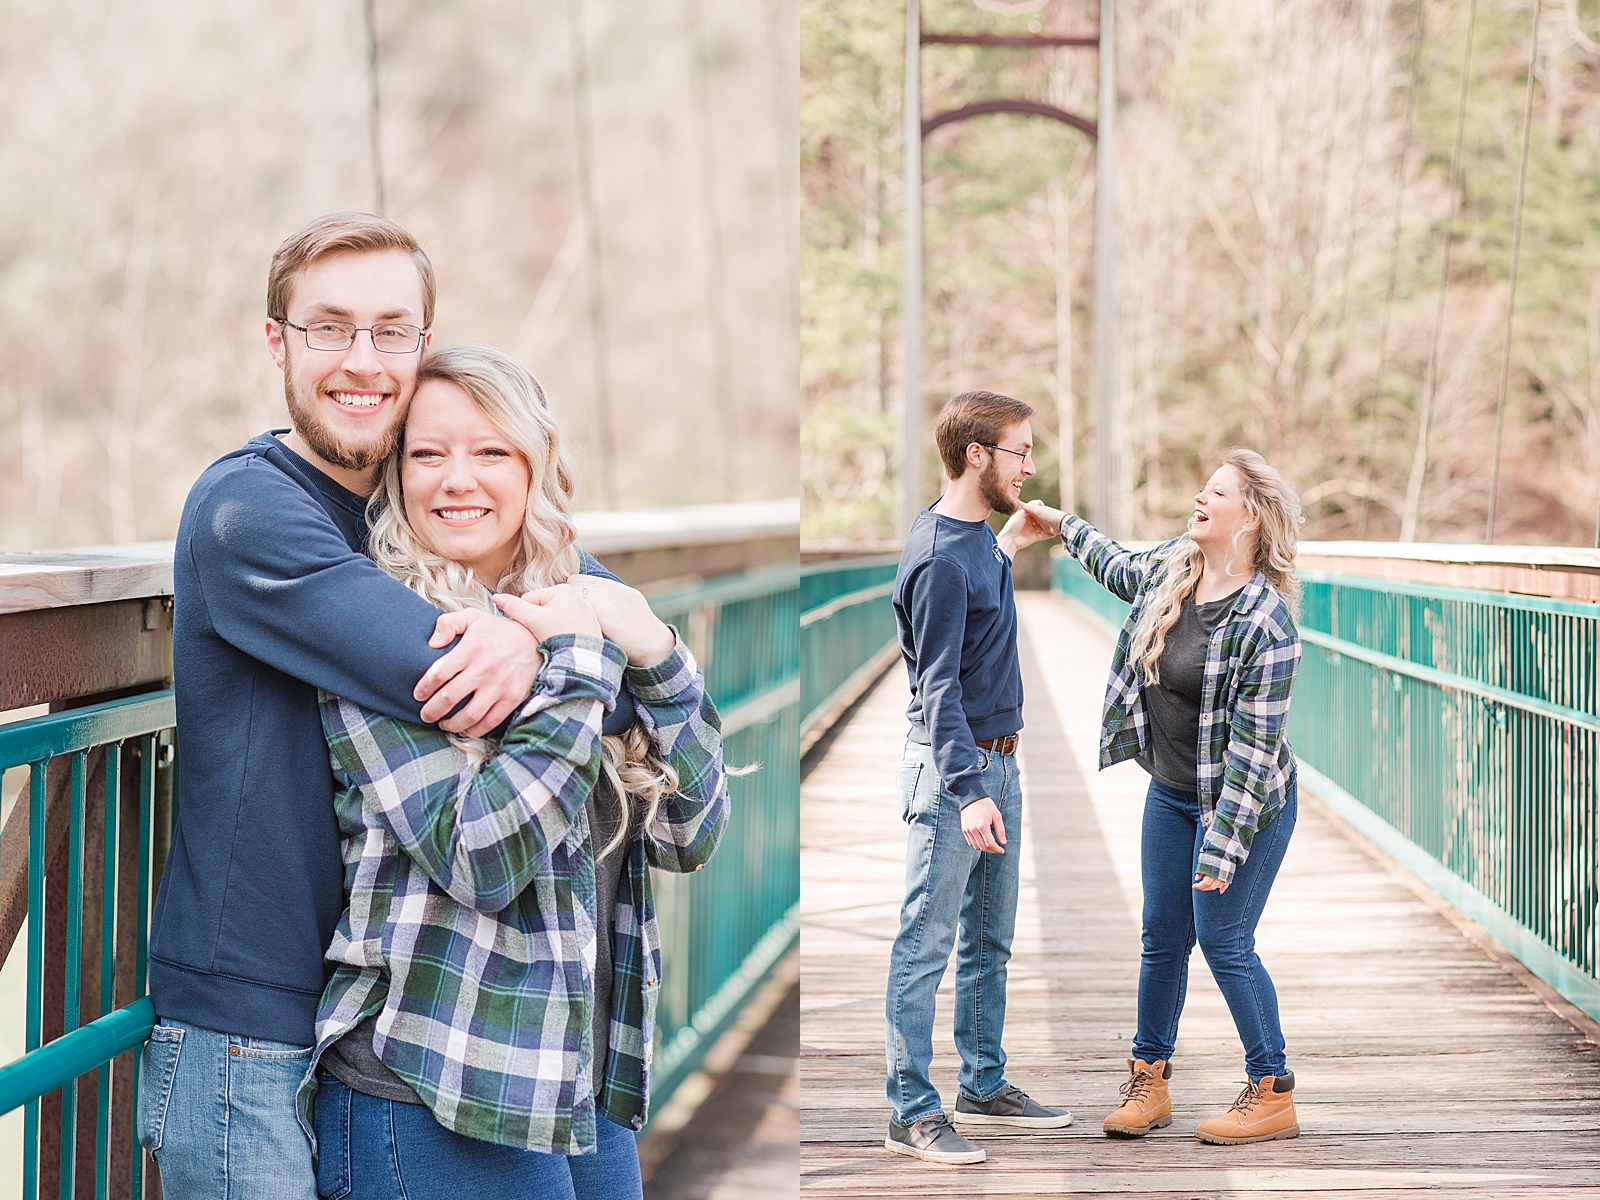 Ocoee River Engagement Session Cody and Haley hugging and dancing on bridge Photos